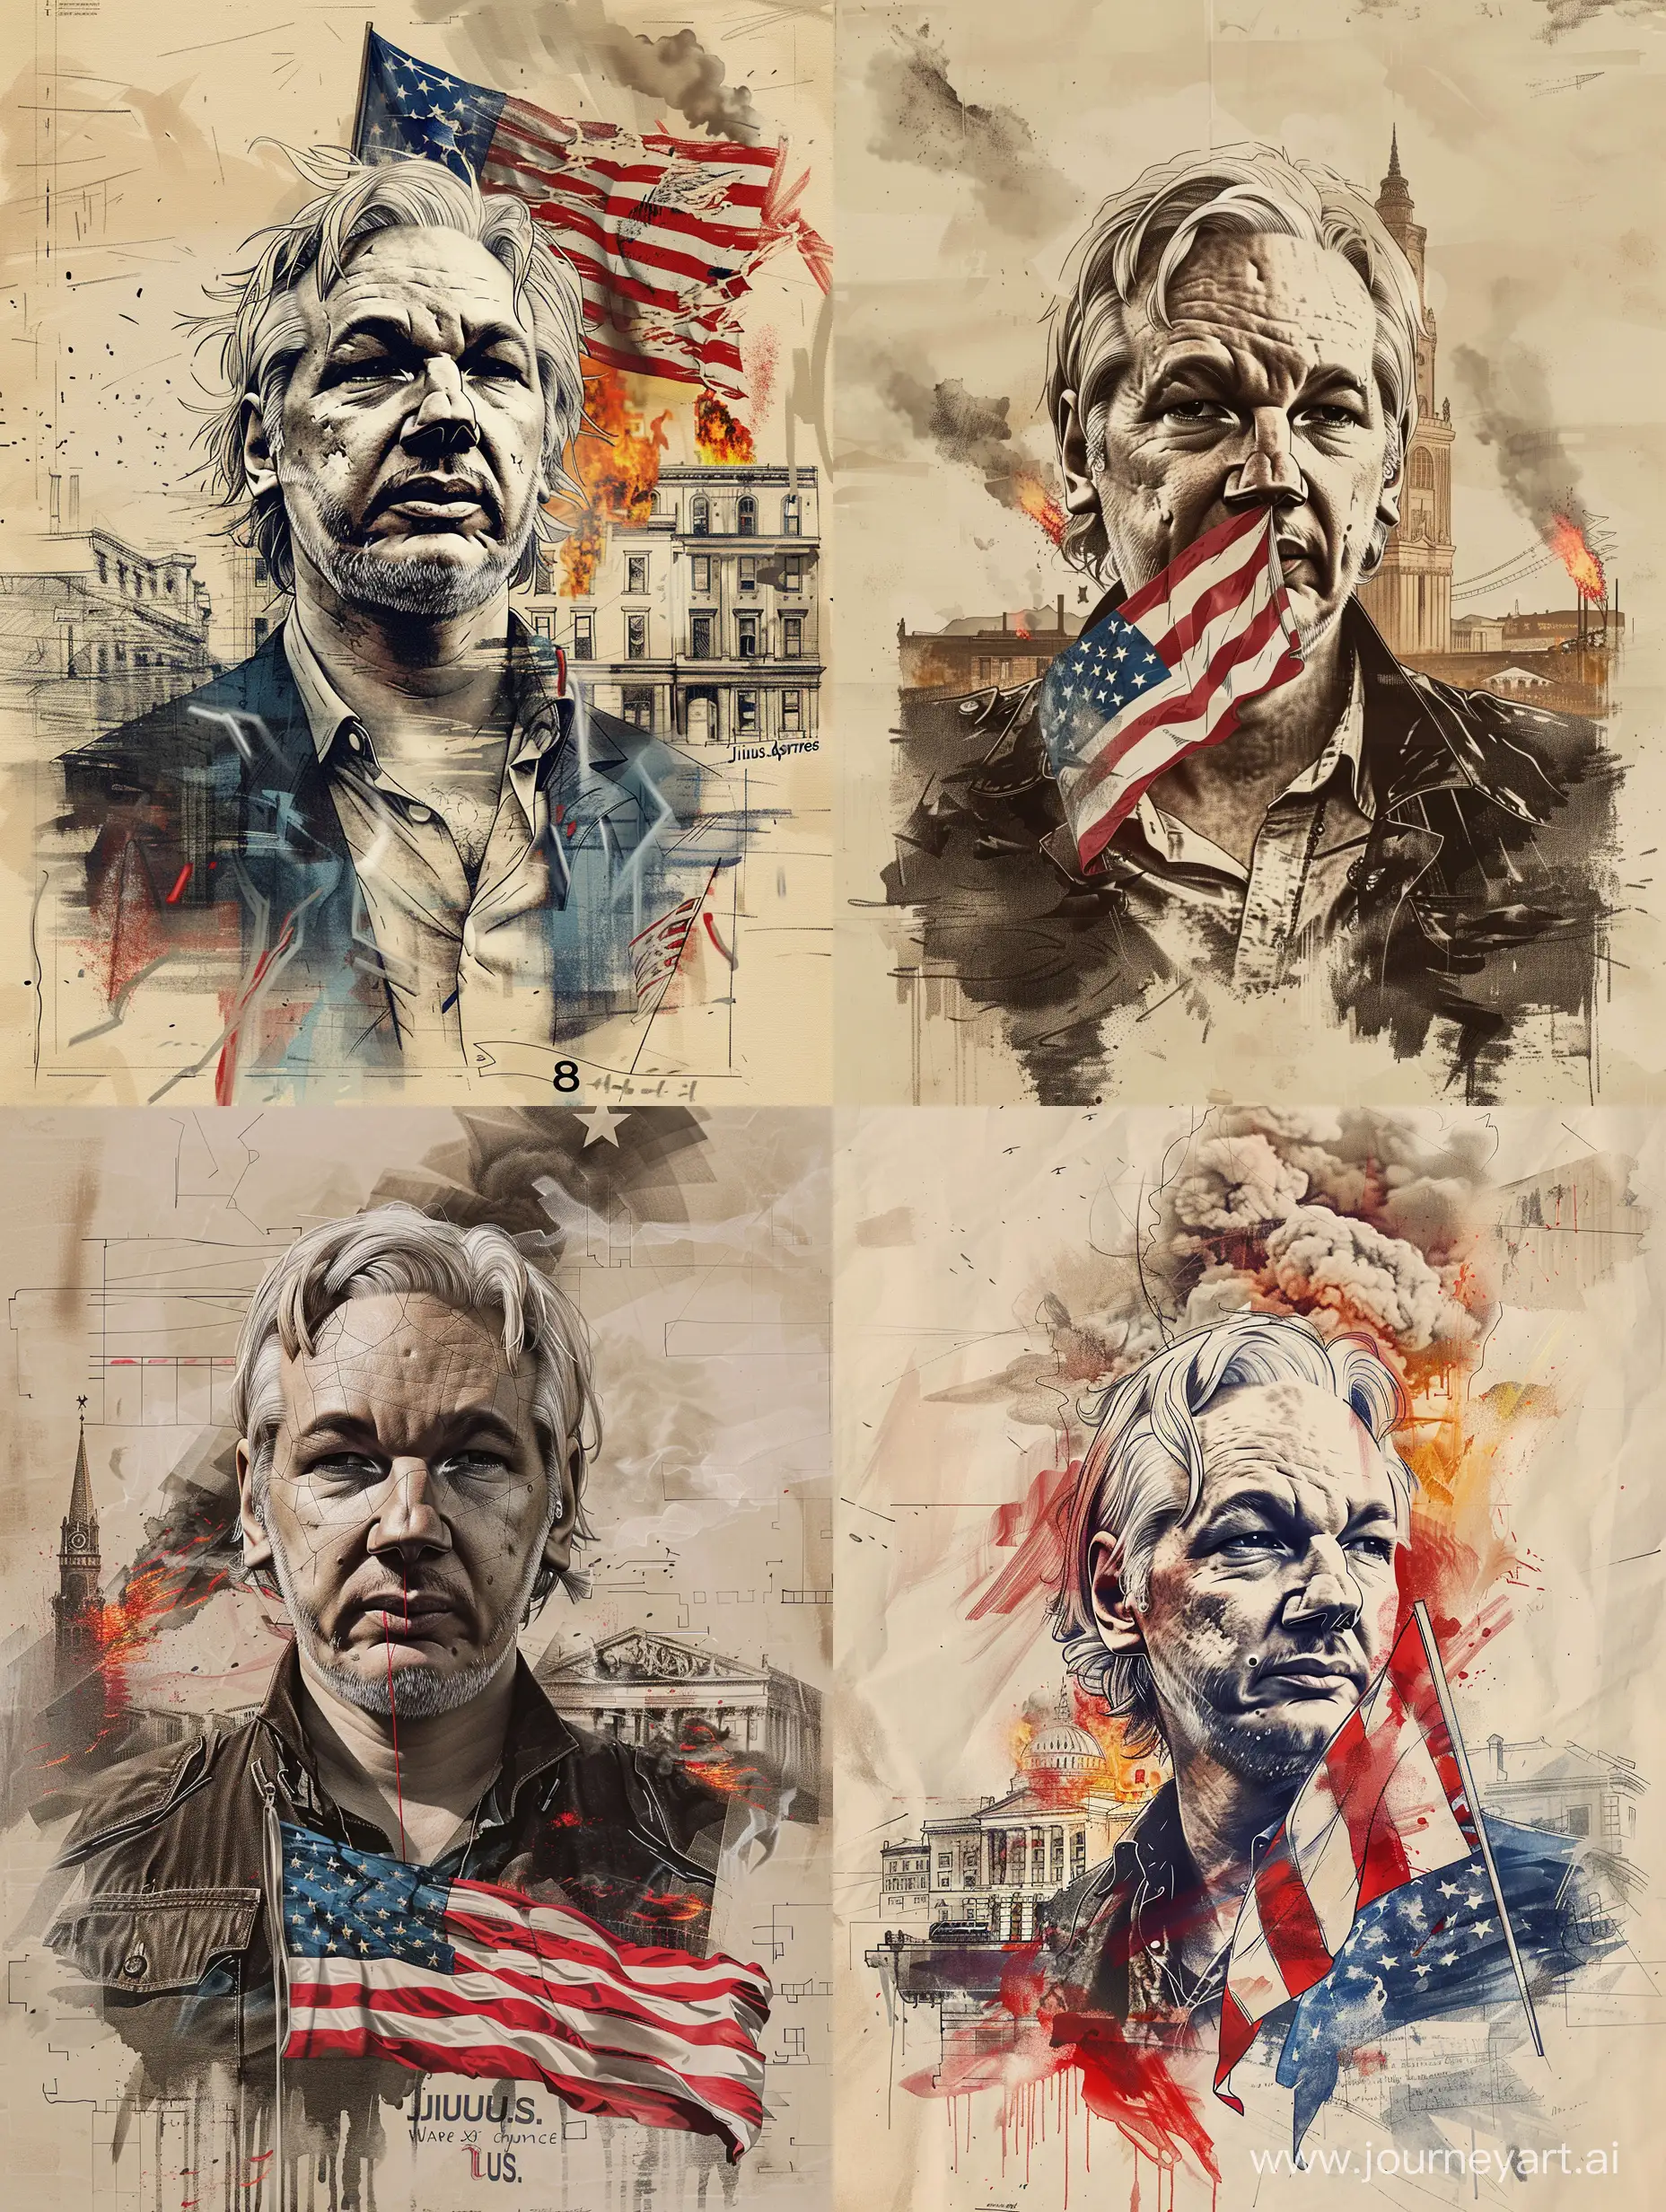 Portrait-Sketch-of-Julian-Assange-with-Taped-Mouth-and-US-Flag-ToulouseLautrec-Influence